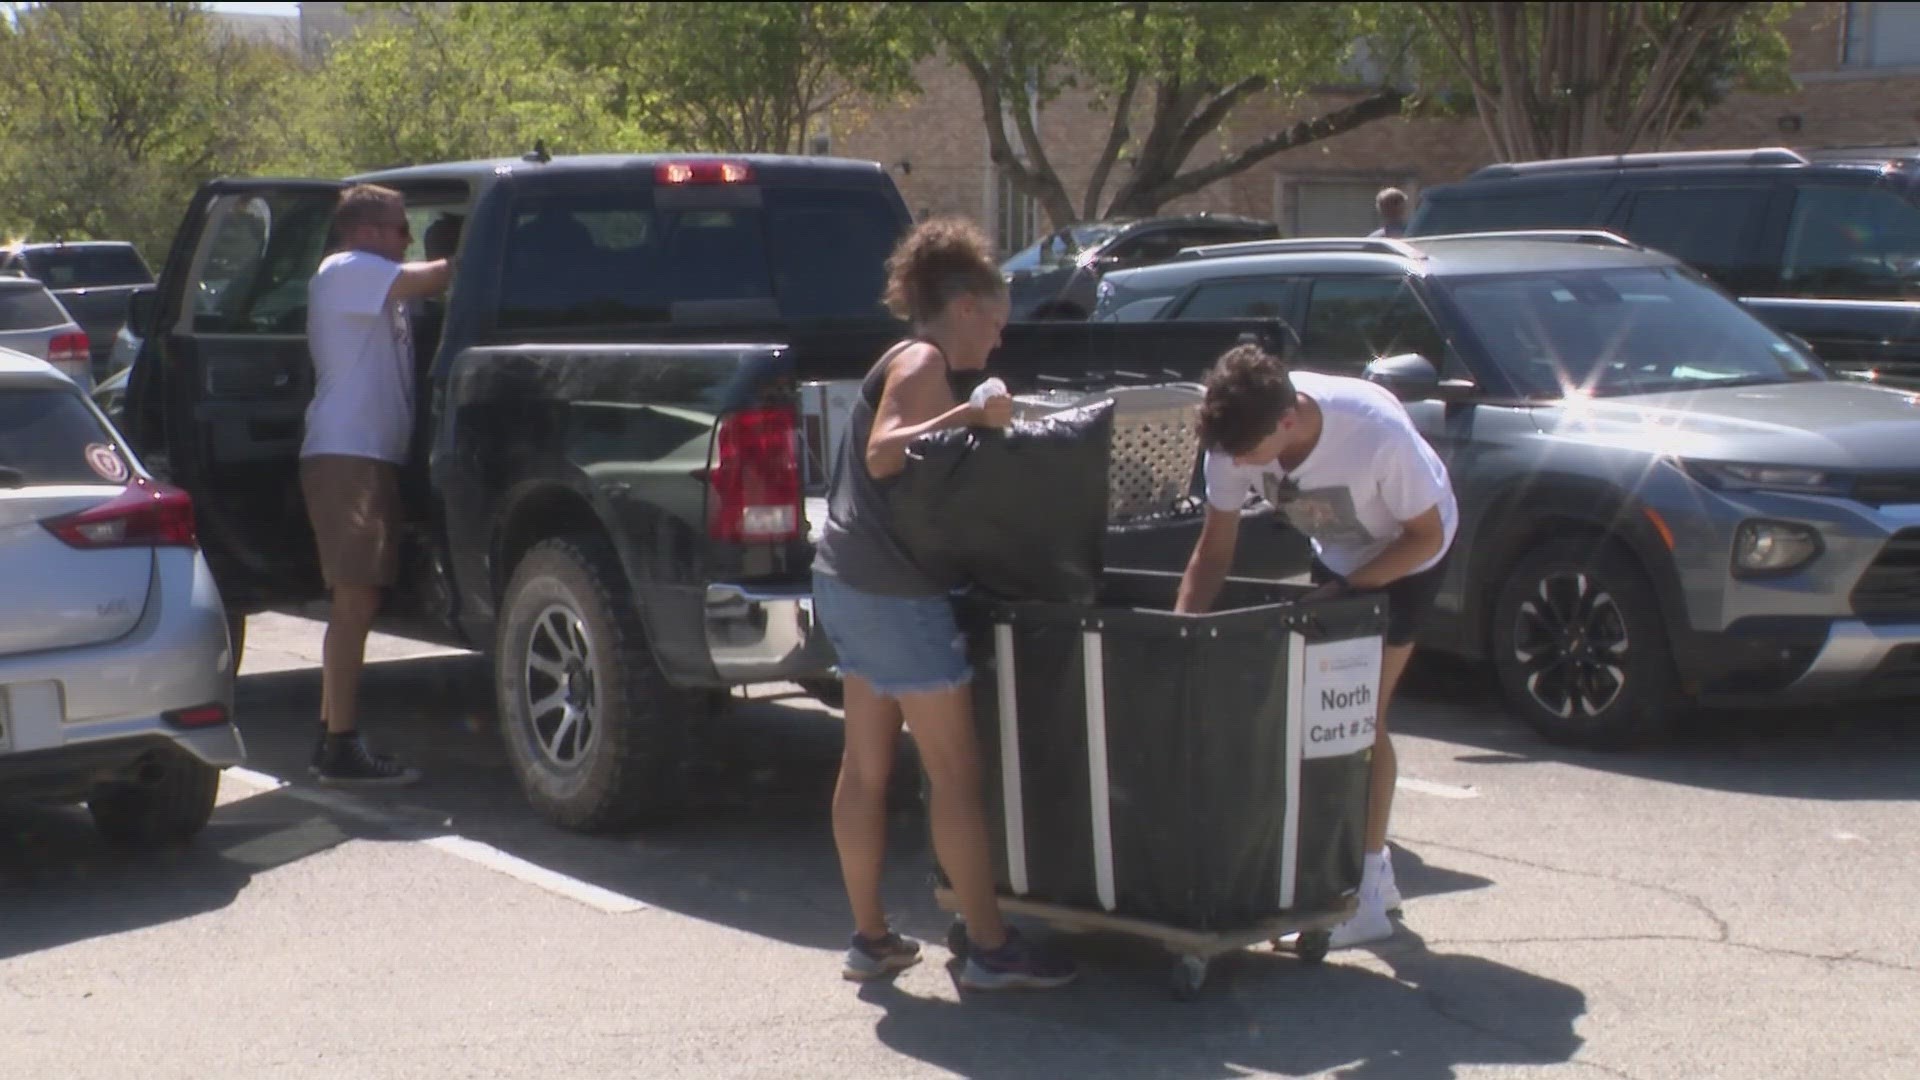 The heat didn't deter the approximately 2,000 students who moved into on-campus housing on Friday.